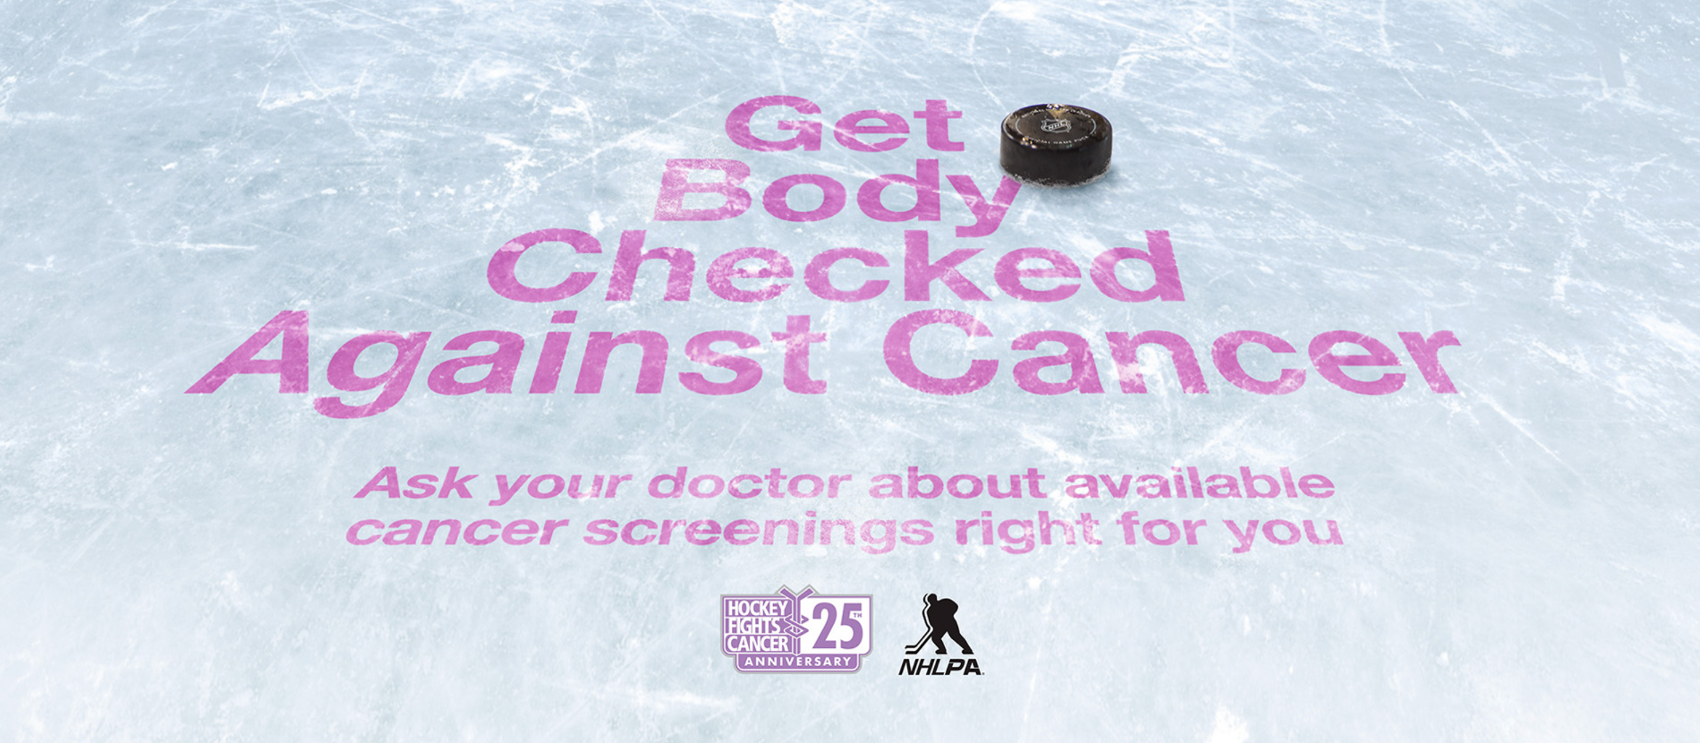  A graphic from AstraZenecas Get Body Checked Against Cancer website